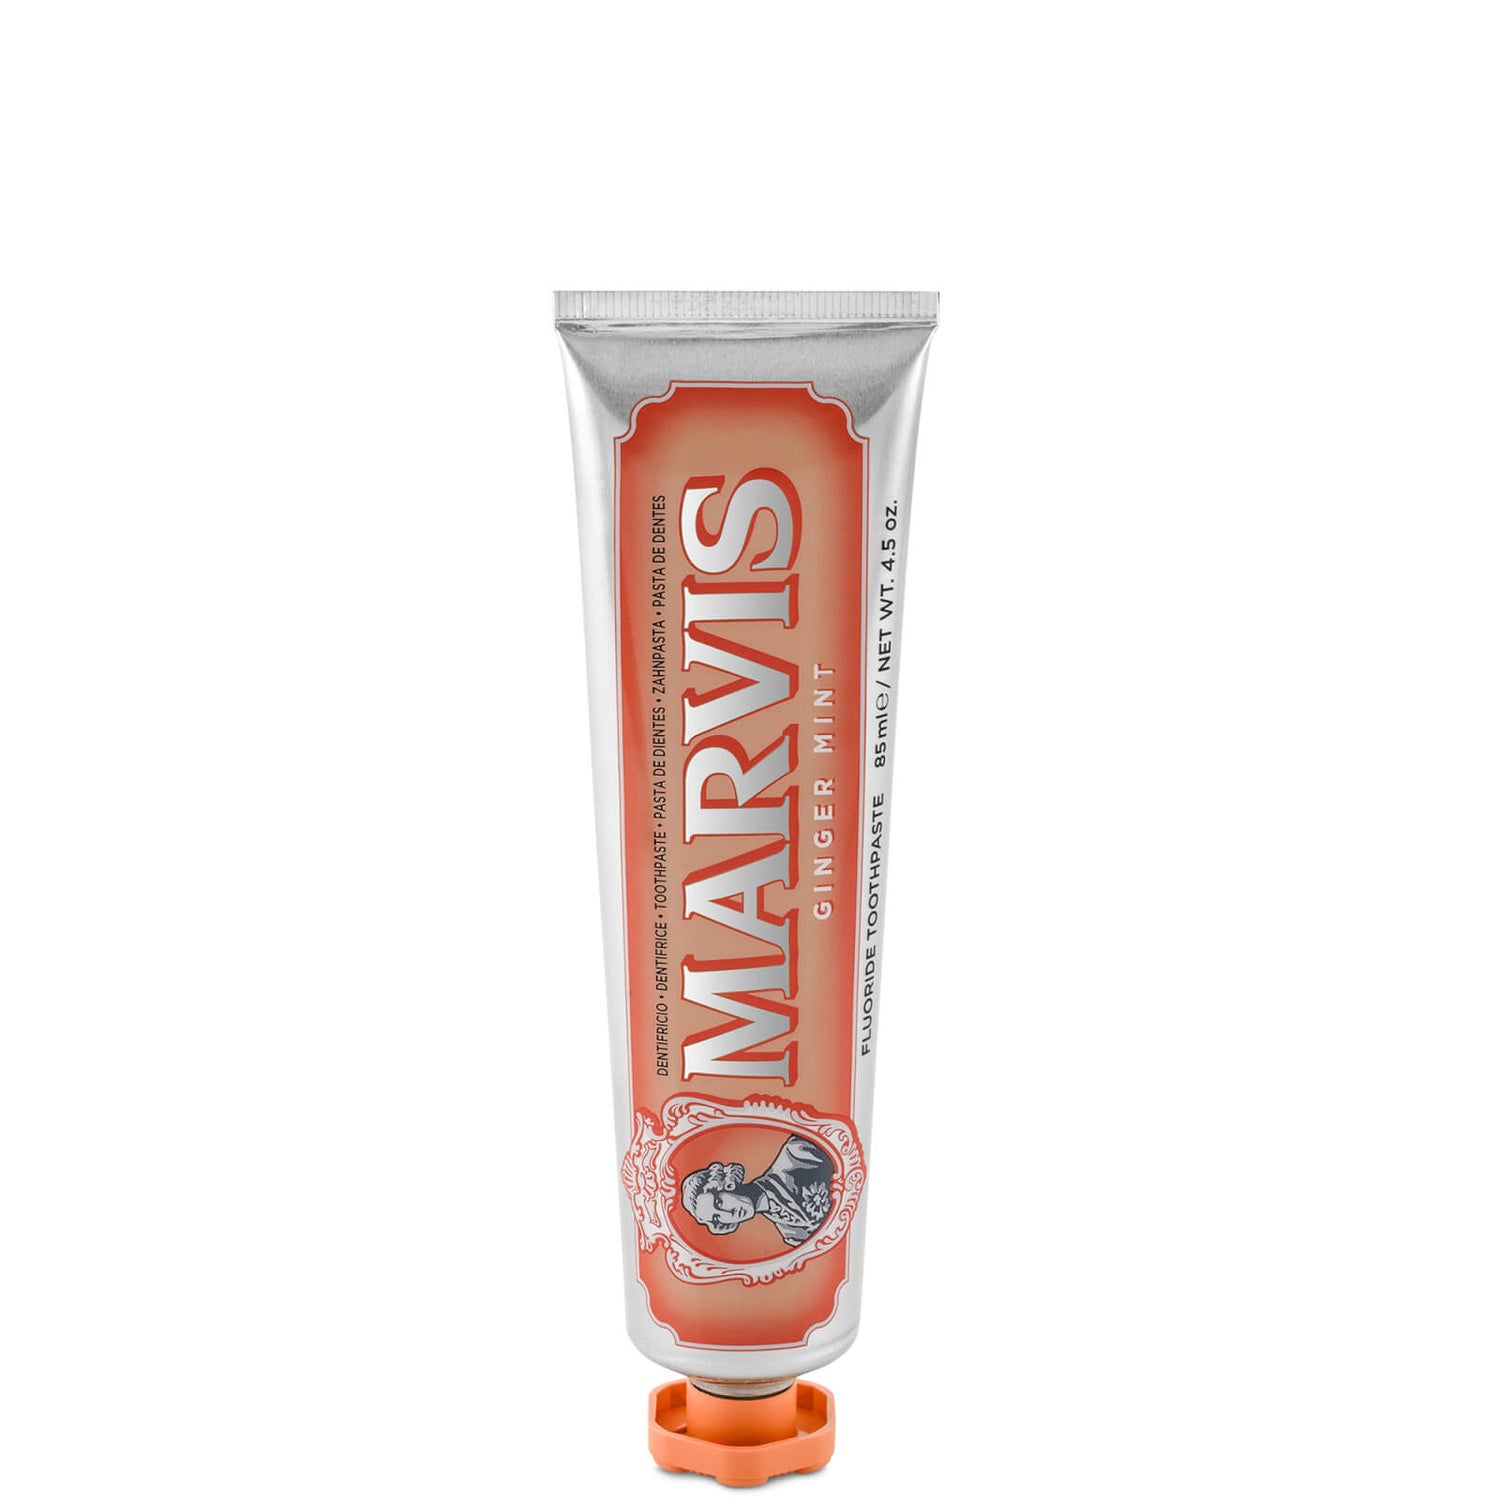 Dentifrice Marvis 85 ml – Ginger (gingembre)